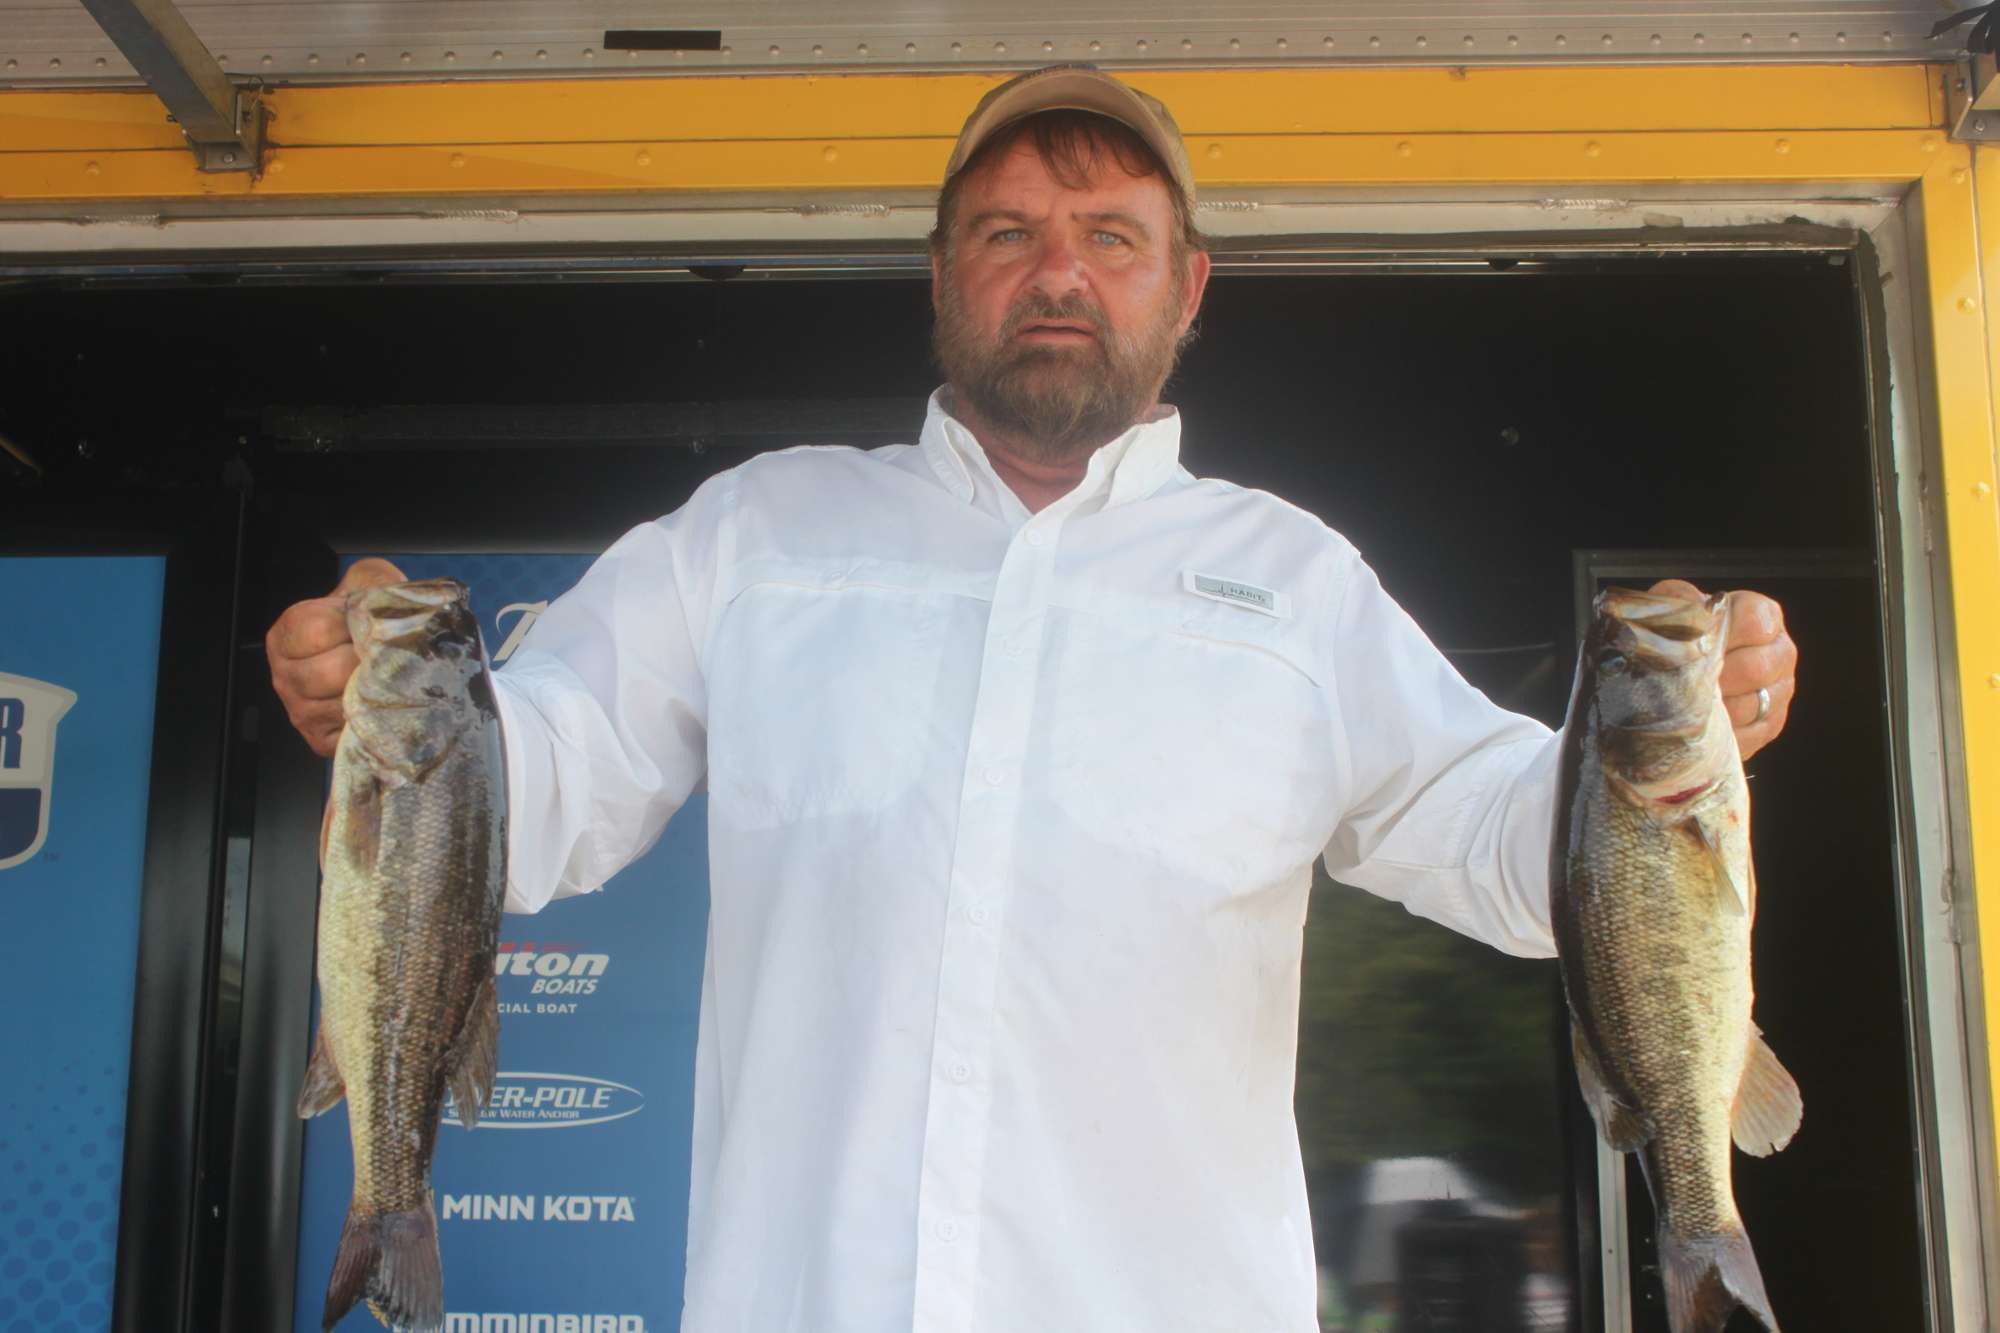 Steve Marks of West Virginia looks good in seventh place among boaters. He has a two-day total of 10 bass weighing 17-8.